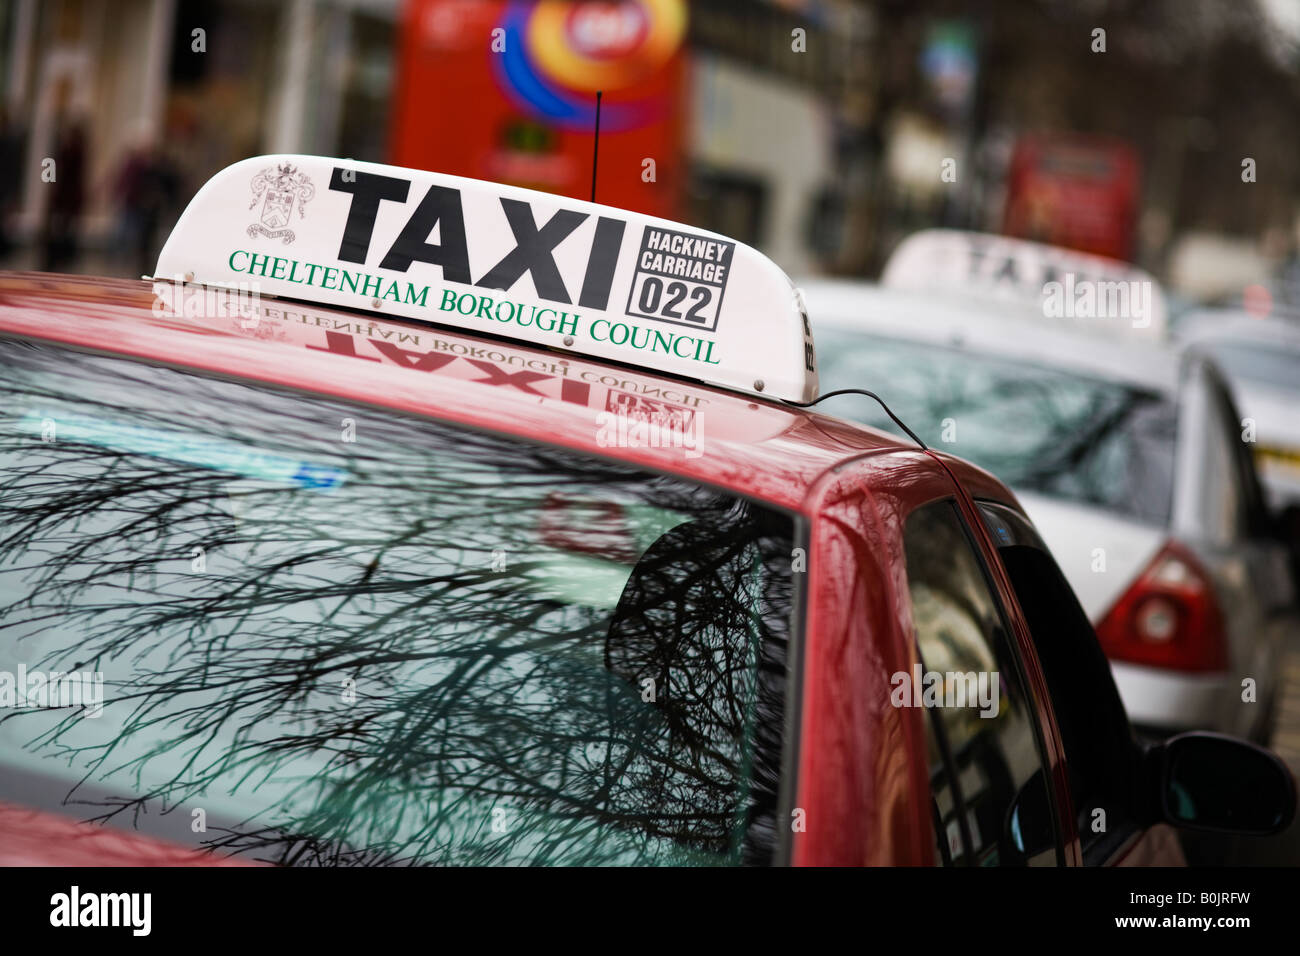 Taxi rank in a town centre, Cheltenham, UK Stock Photo